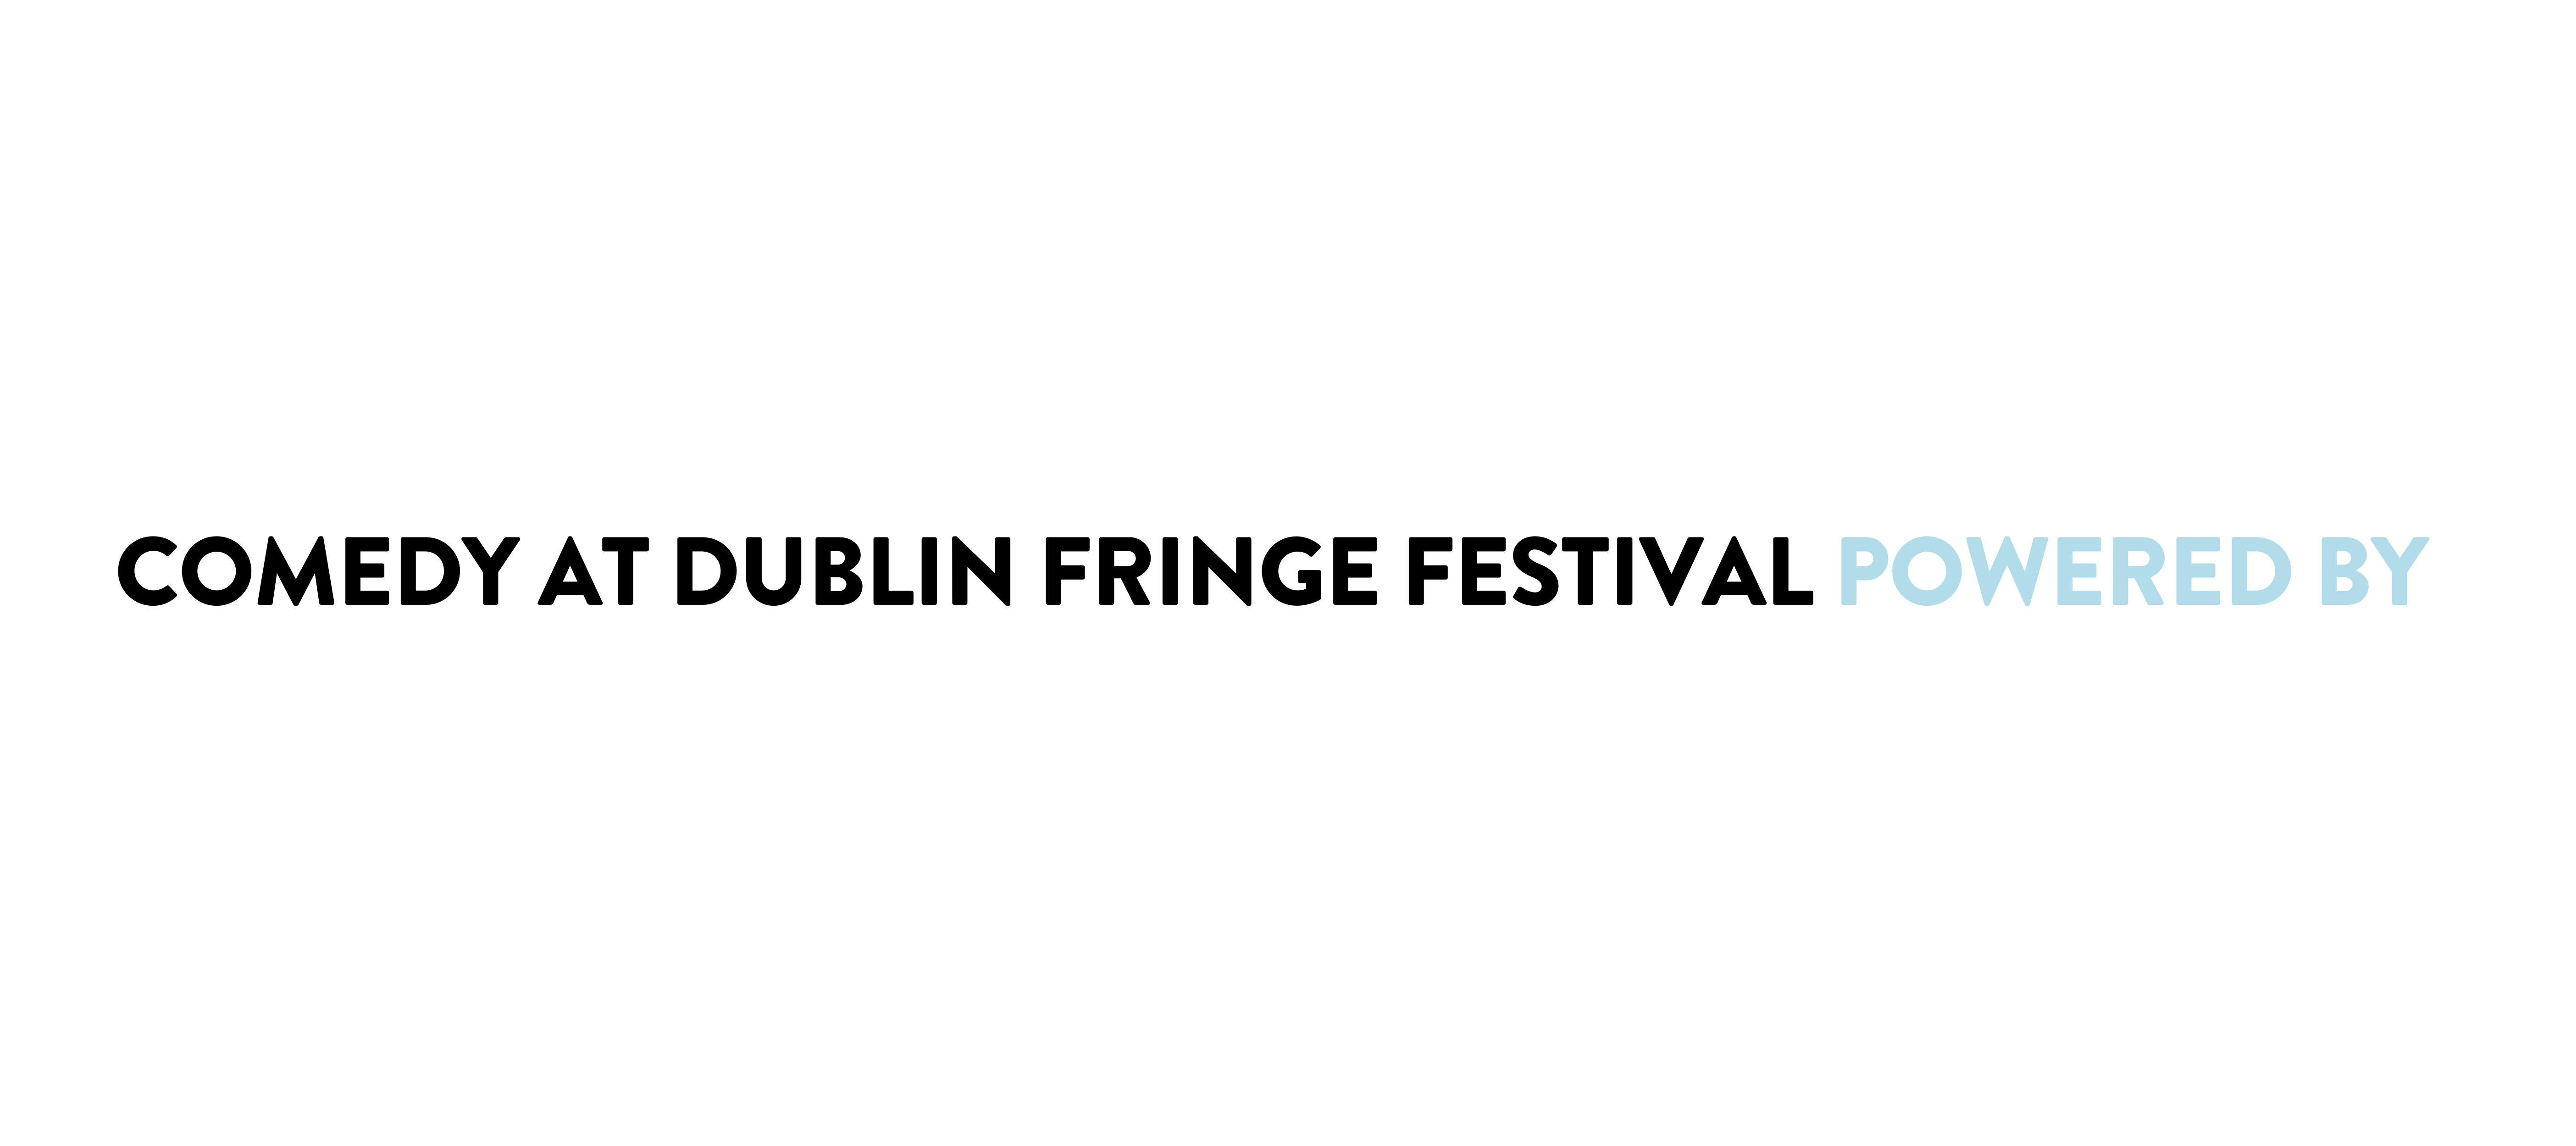 Comedy at Dublin Fringe Festival Powered by Squarespace